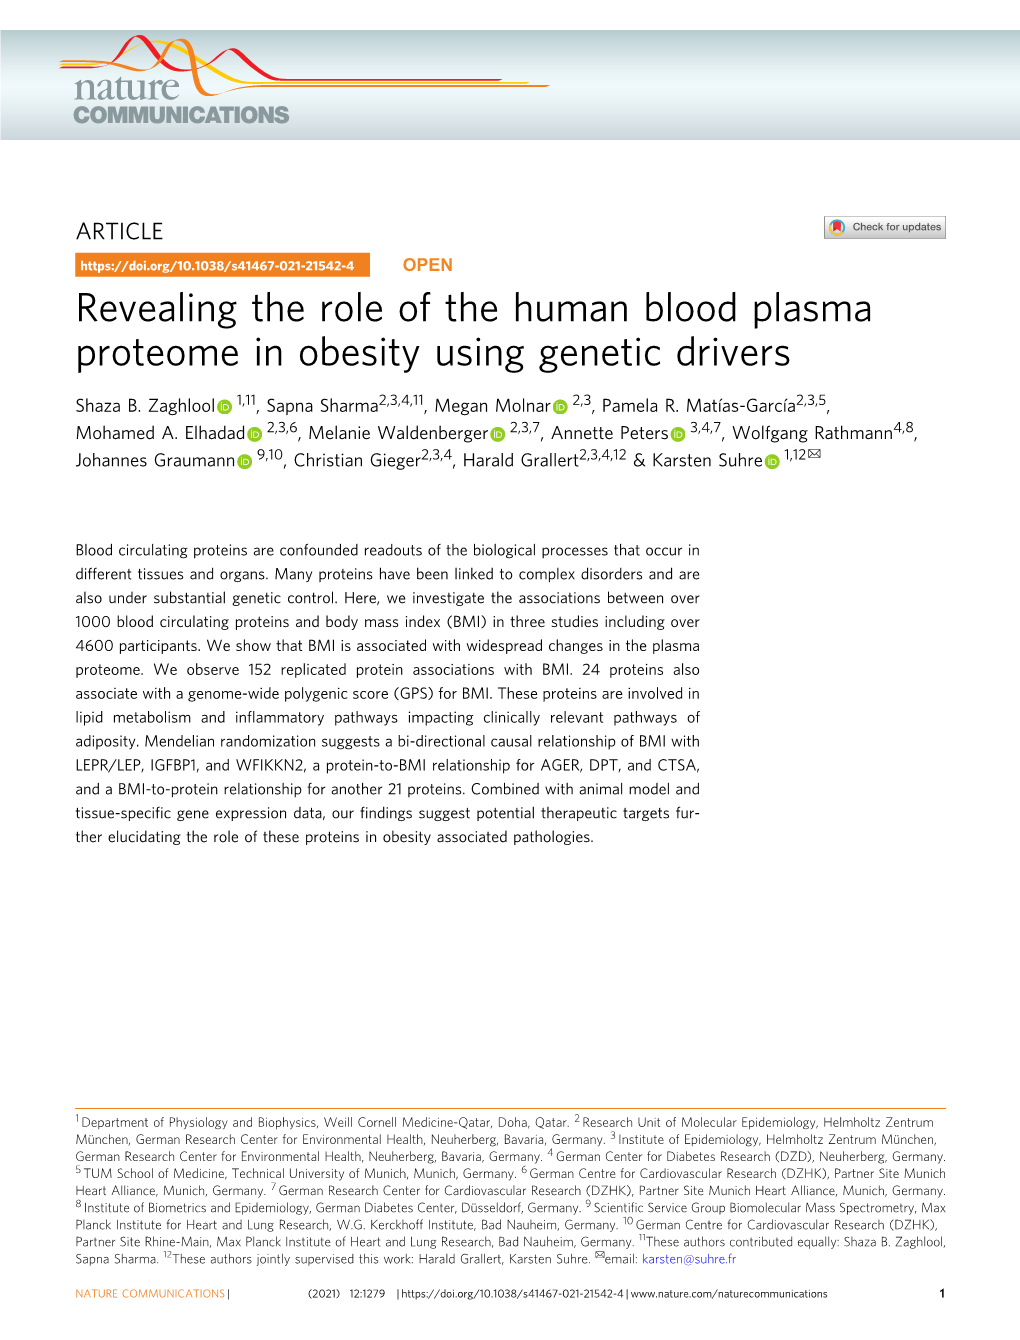 Revealing the Role of the Human Blood Plasma Proteome in Obesity Using Genetic Drivers